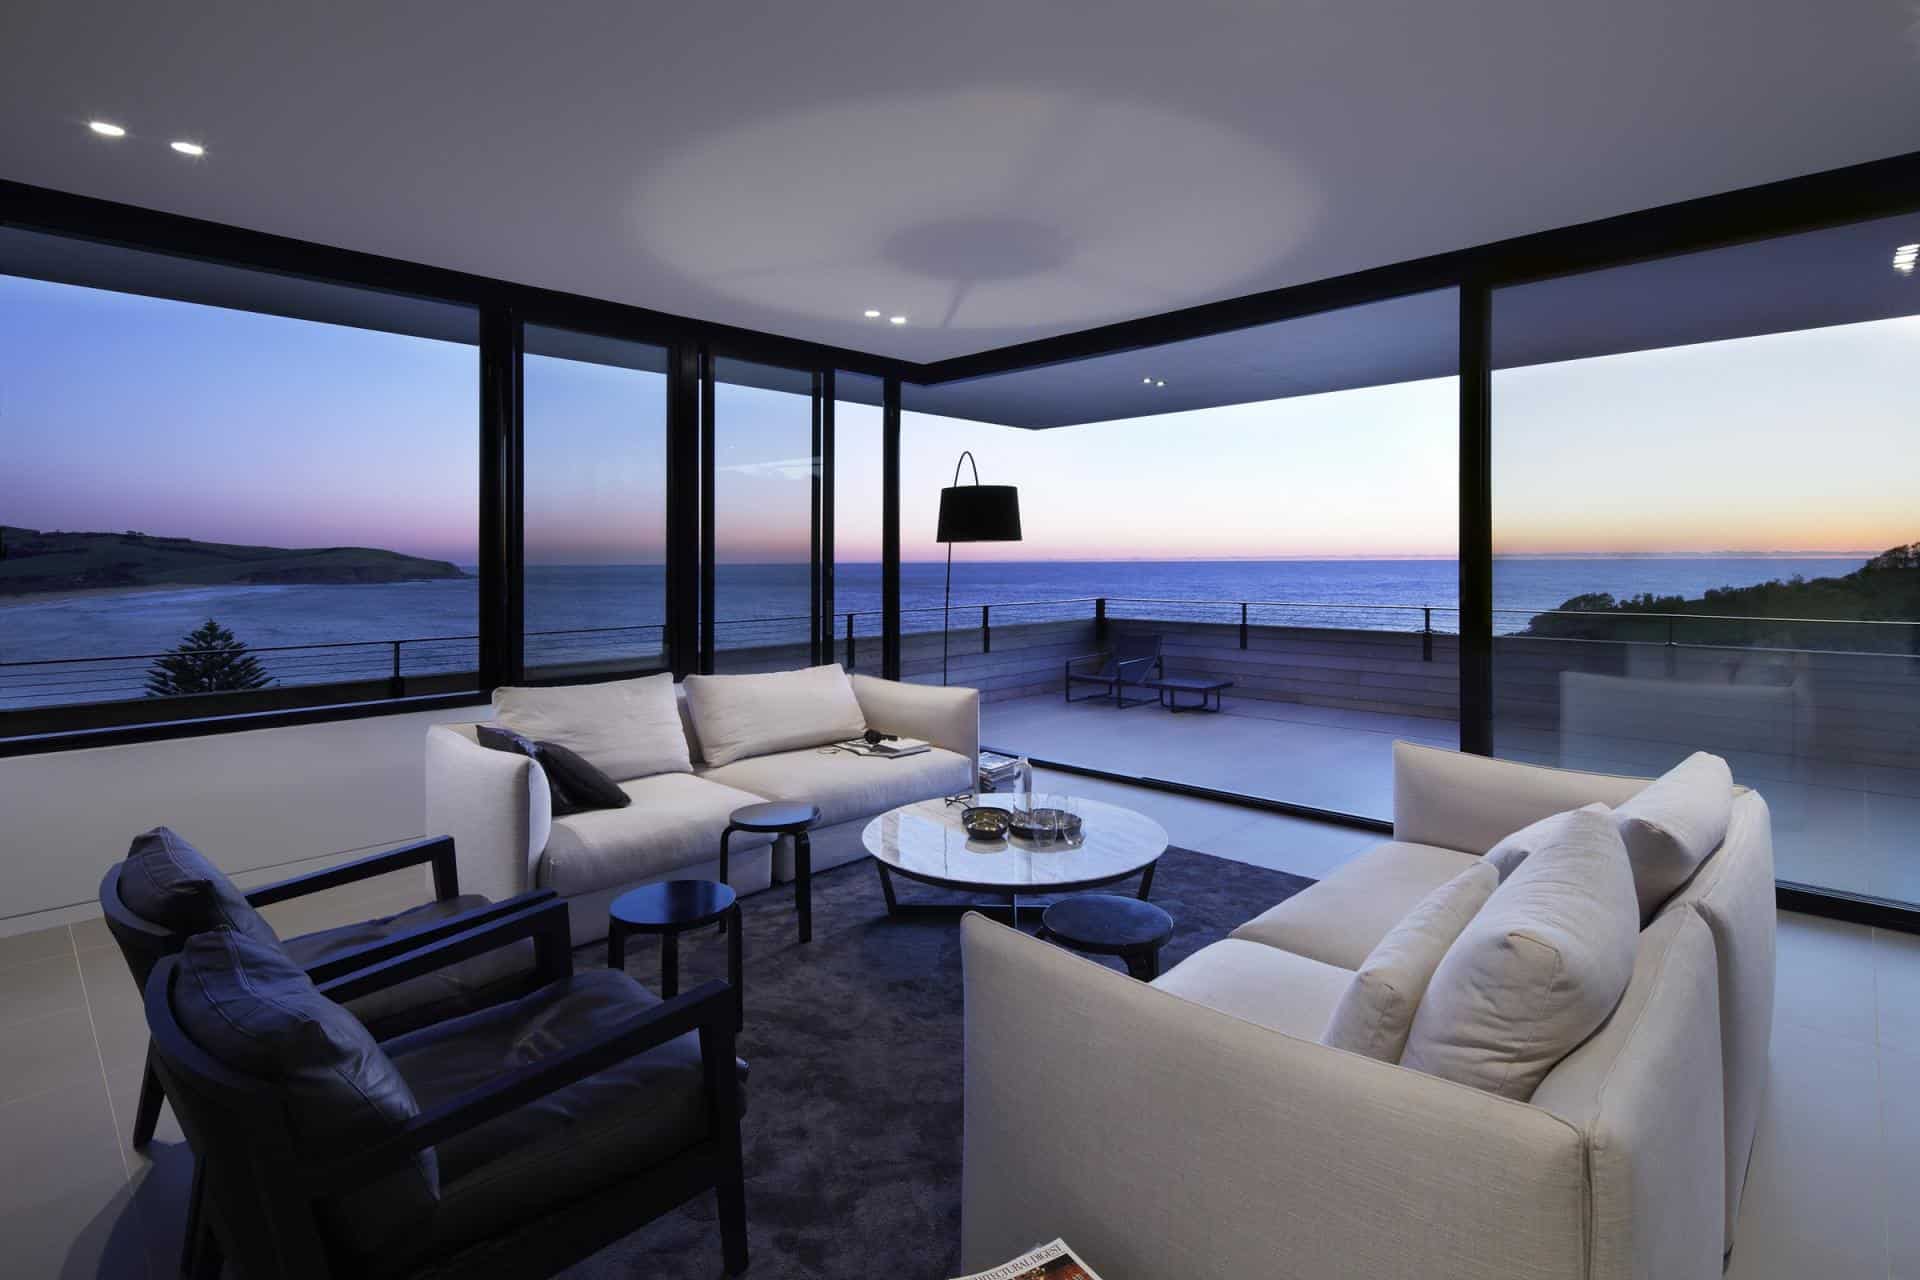 Ocean Front Home with 270 deg Views from Elevated Porch